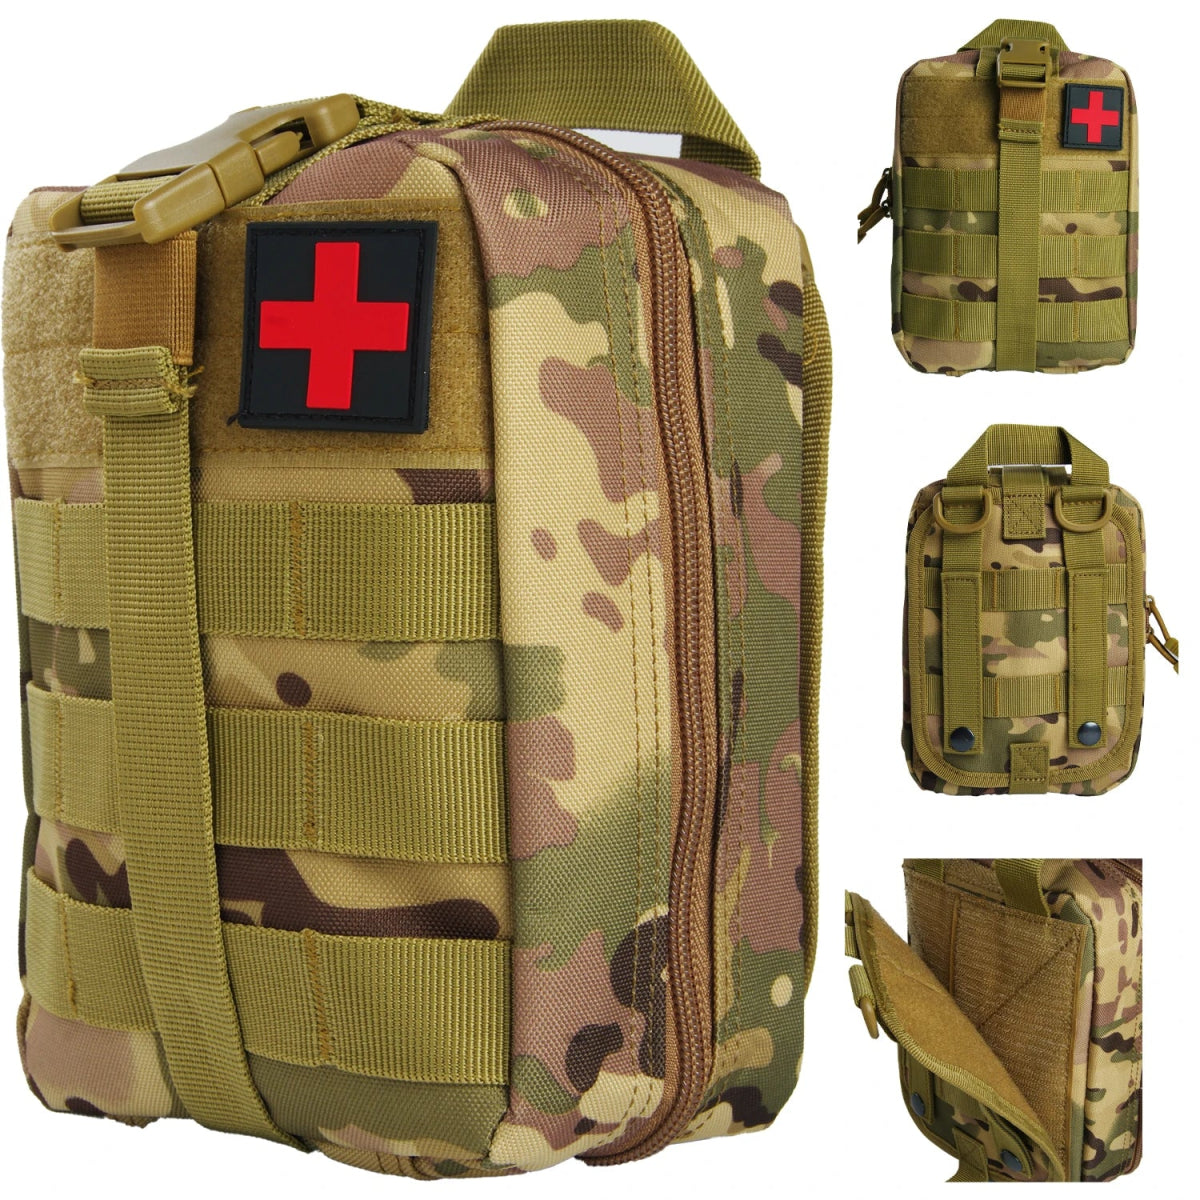 First Aid Survival Kit Tactical IFAK Pouch Supplied Molle Camping Kit, 18 EMT Items - Coffeio Store